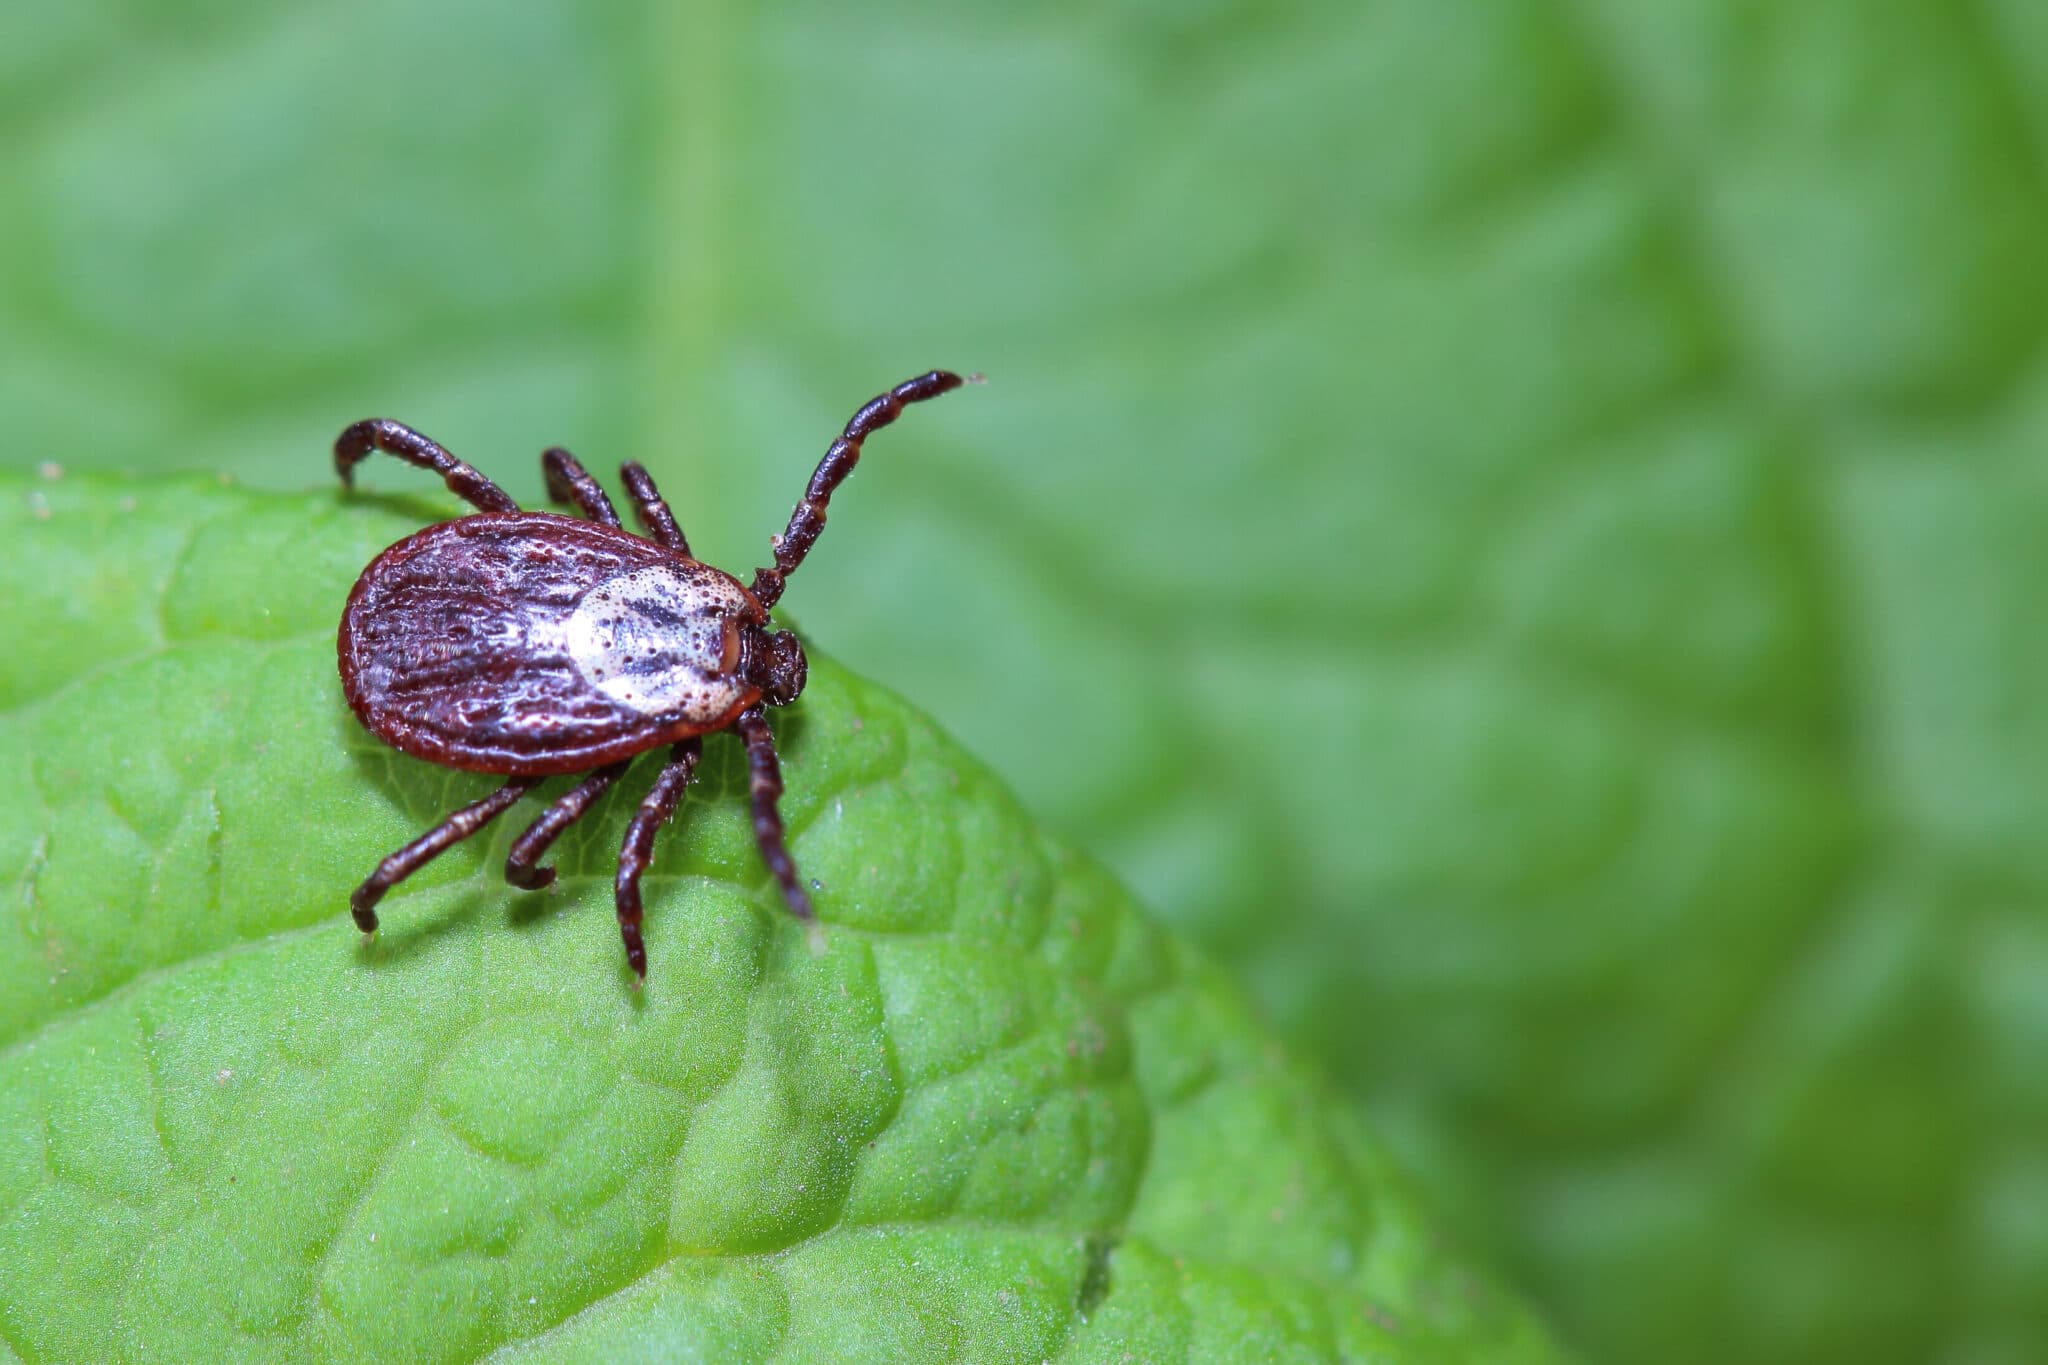 How To Get Rid Of Ticks On Dogs And In The Yard